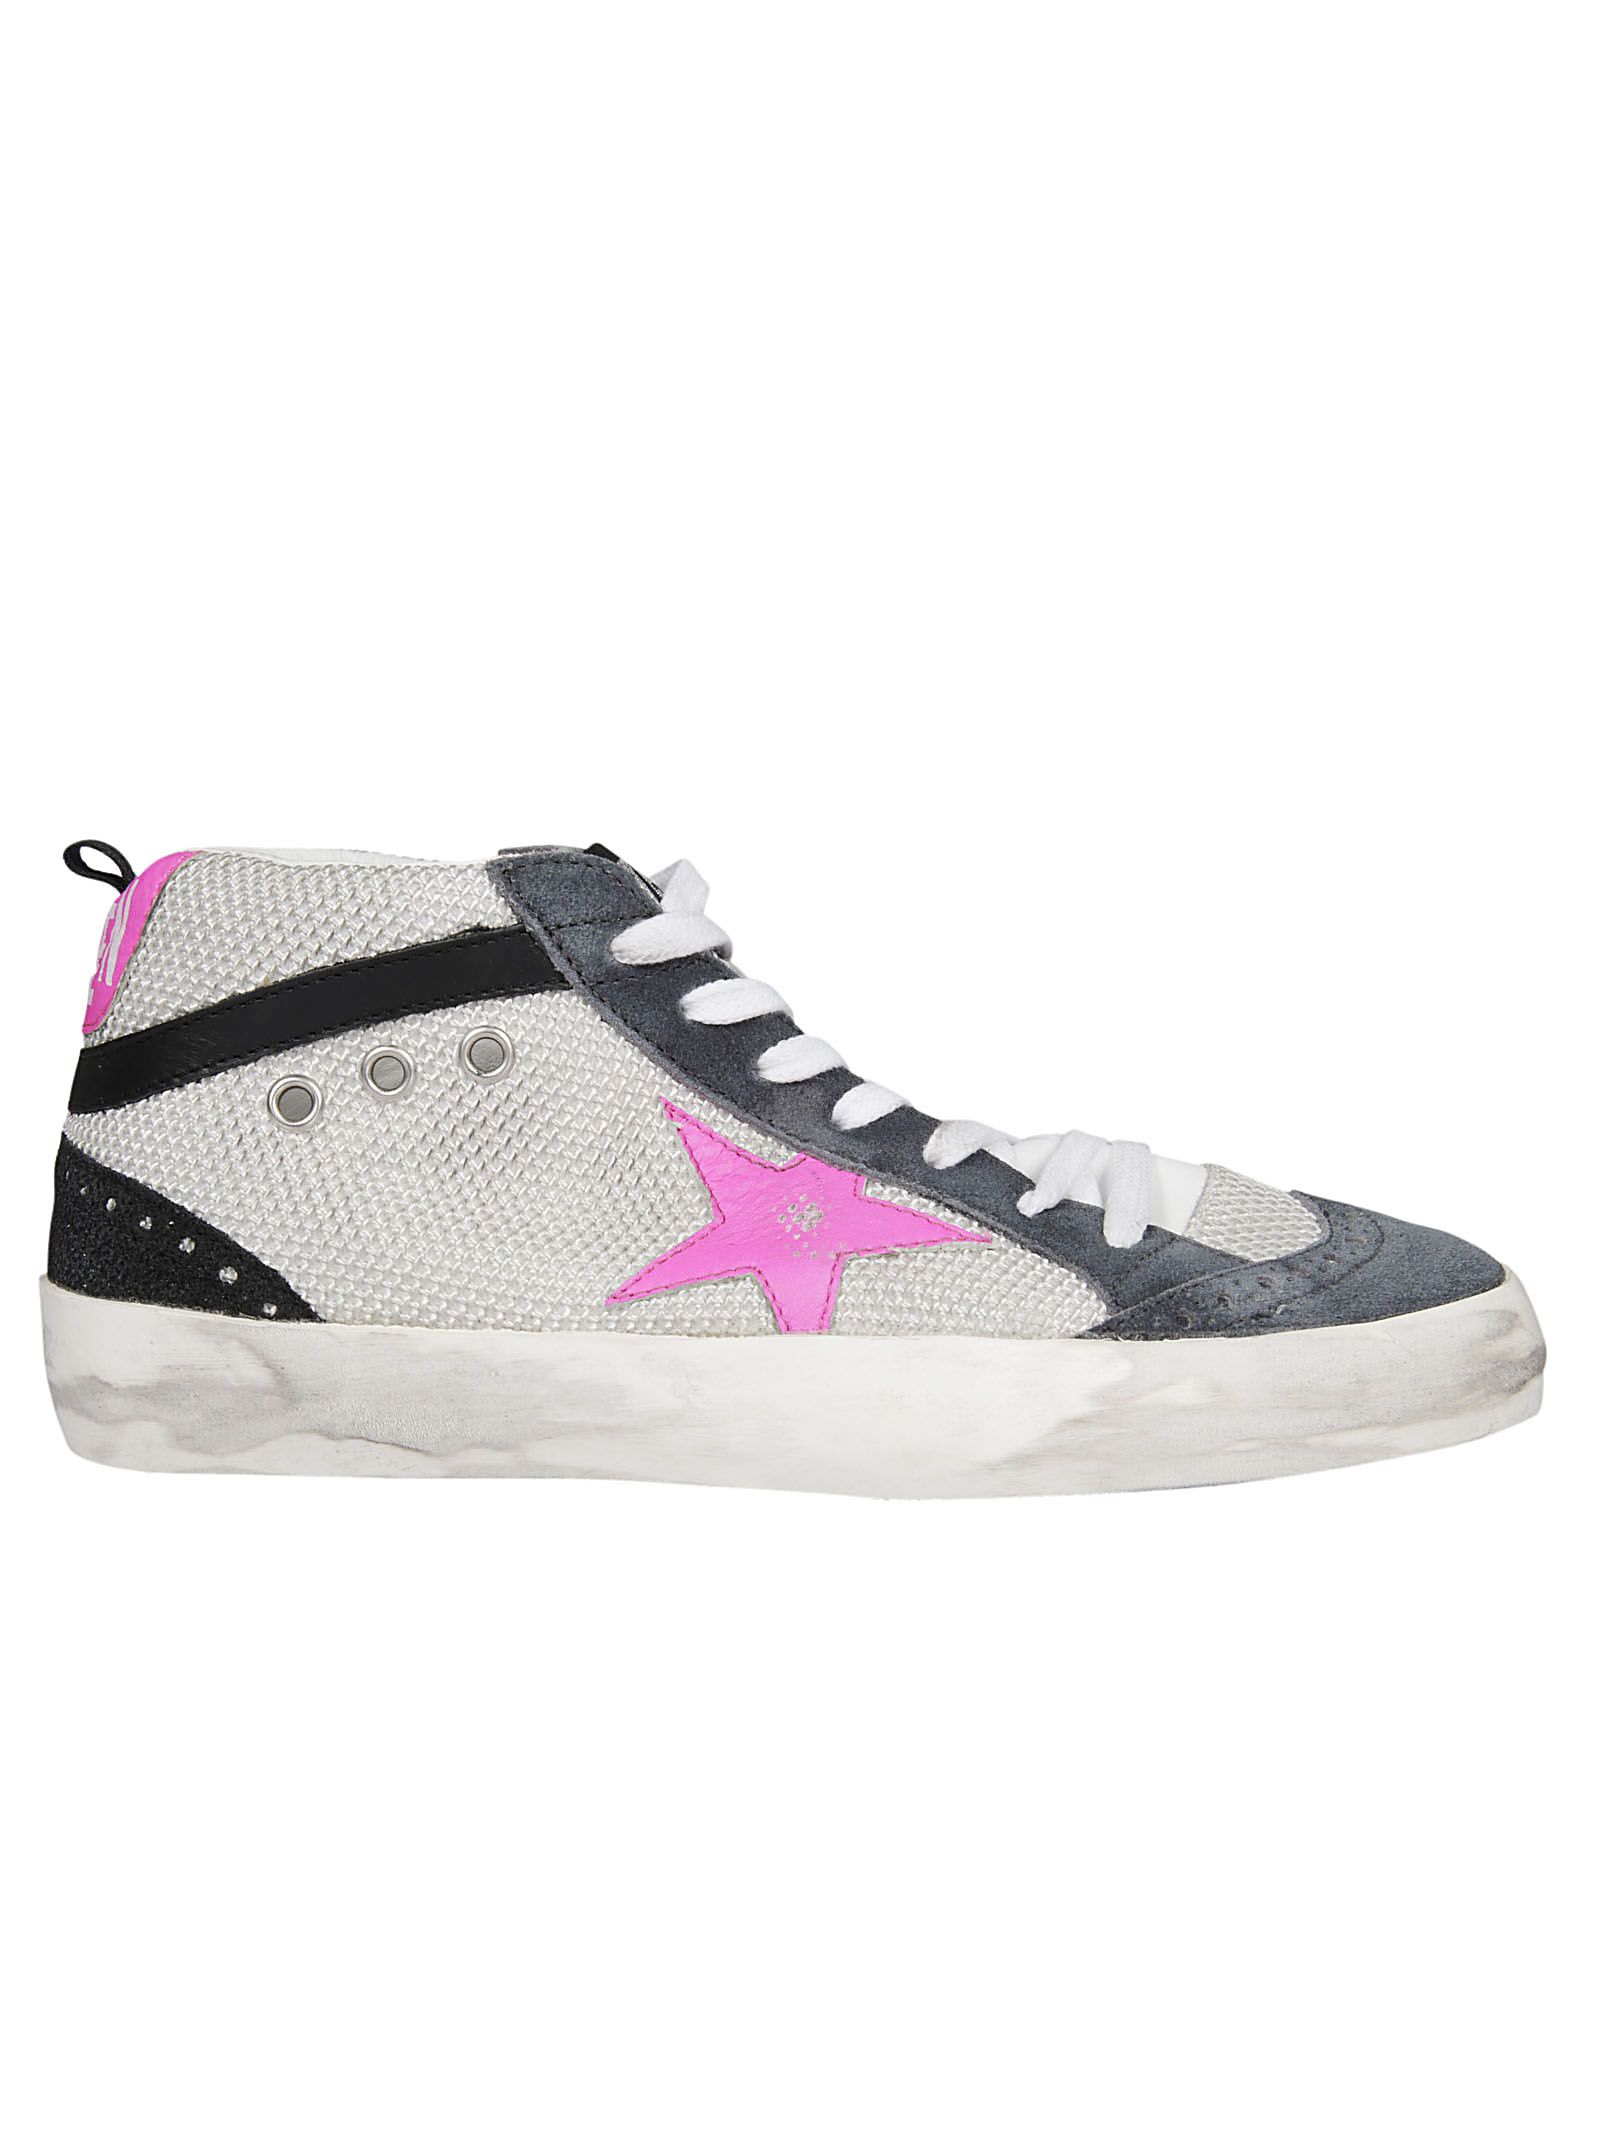 GOLDEN GOOSE MID STAR SNEAKERS WITH SUEDE AND LEATHER, WHITE/PINK ...